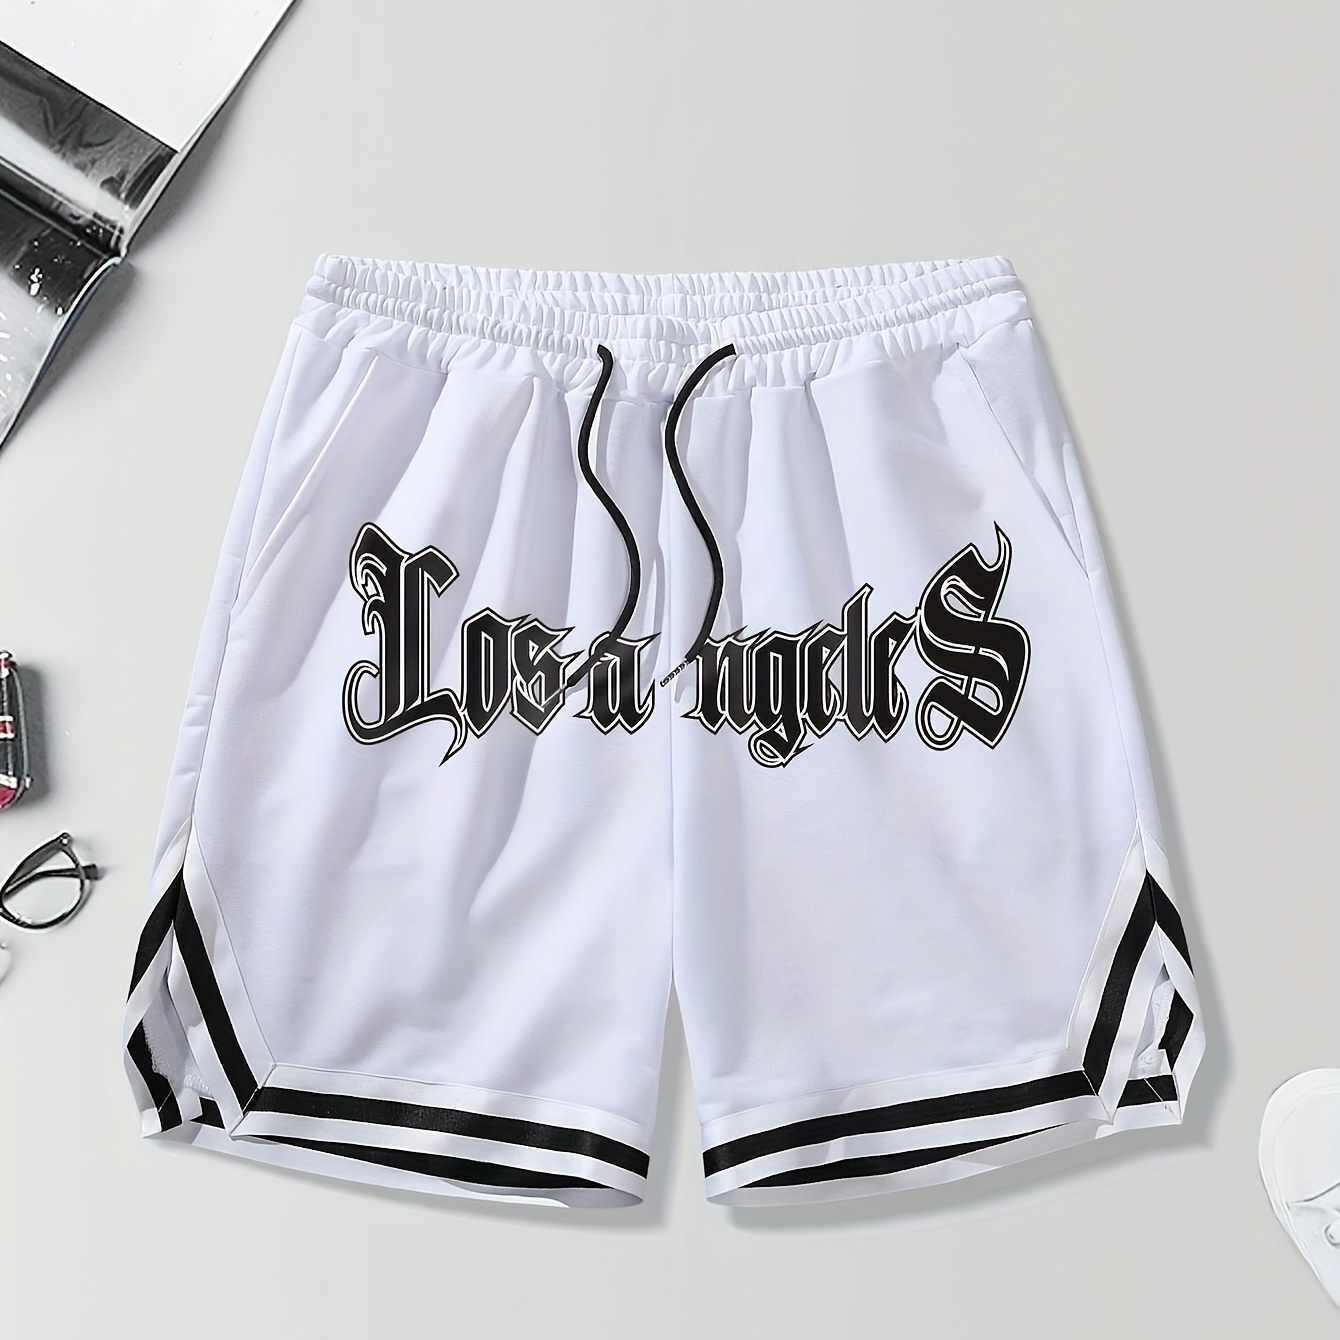 

Men's "los Angeles" Letter Print Sports Shorts With Drawstring And Pockets, Chic And Stylish Shorts For Summer Basketball And Outdoors Sports Wear